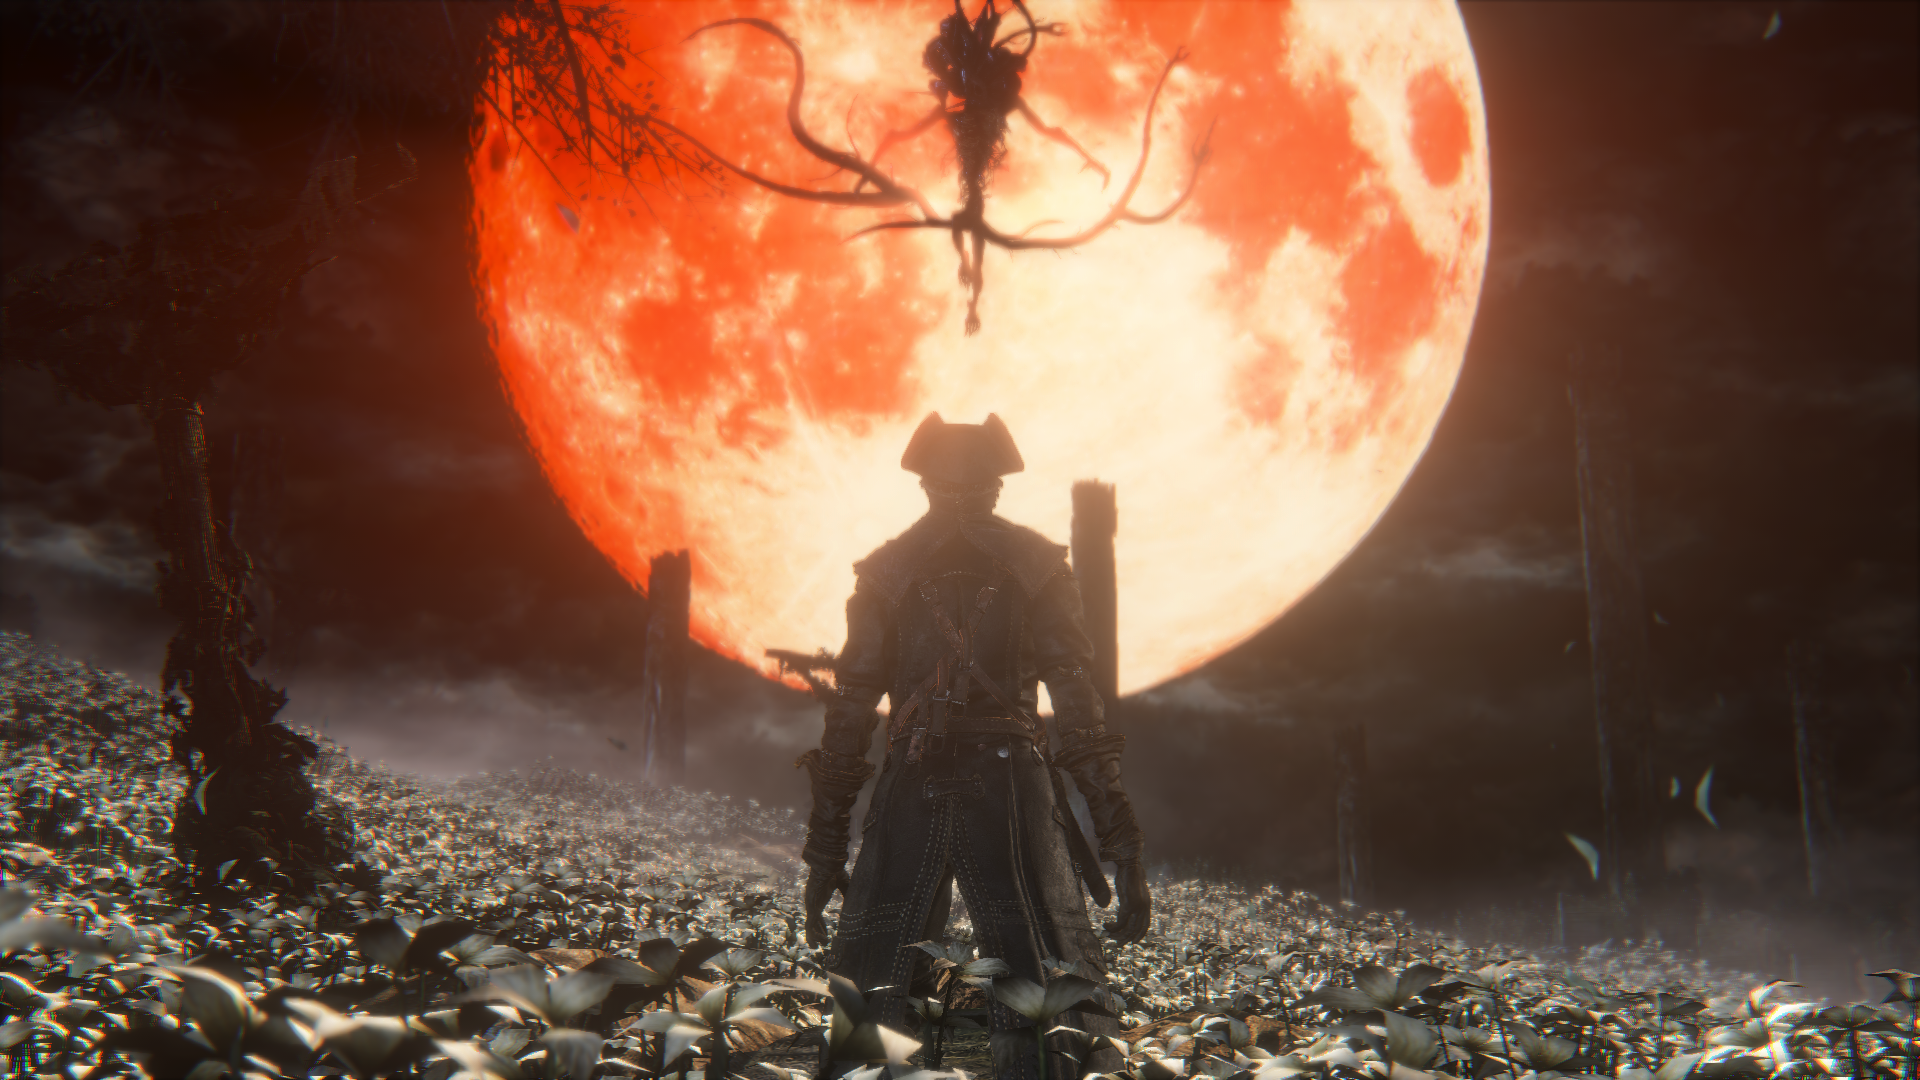 Splashy Rumors of the Presence of Bloodborne PC, Is It Possible?